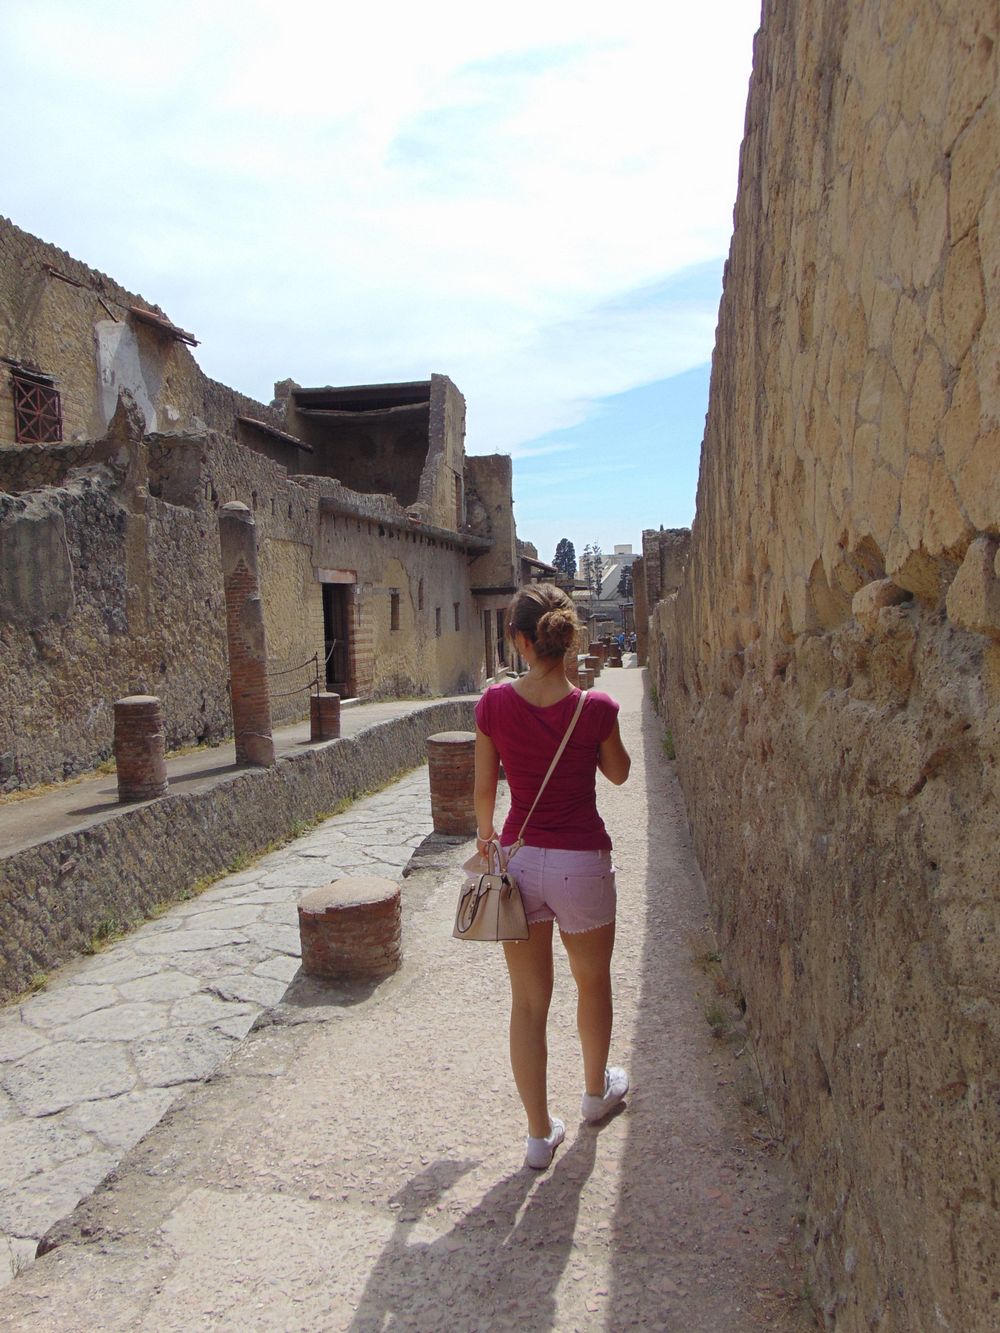 Girl walking in the street of ancient Ercolano